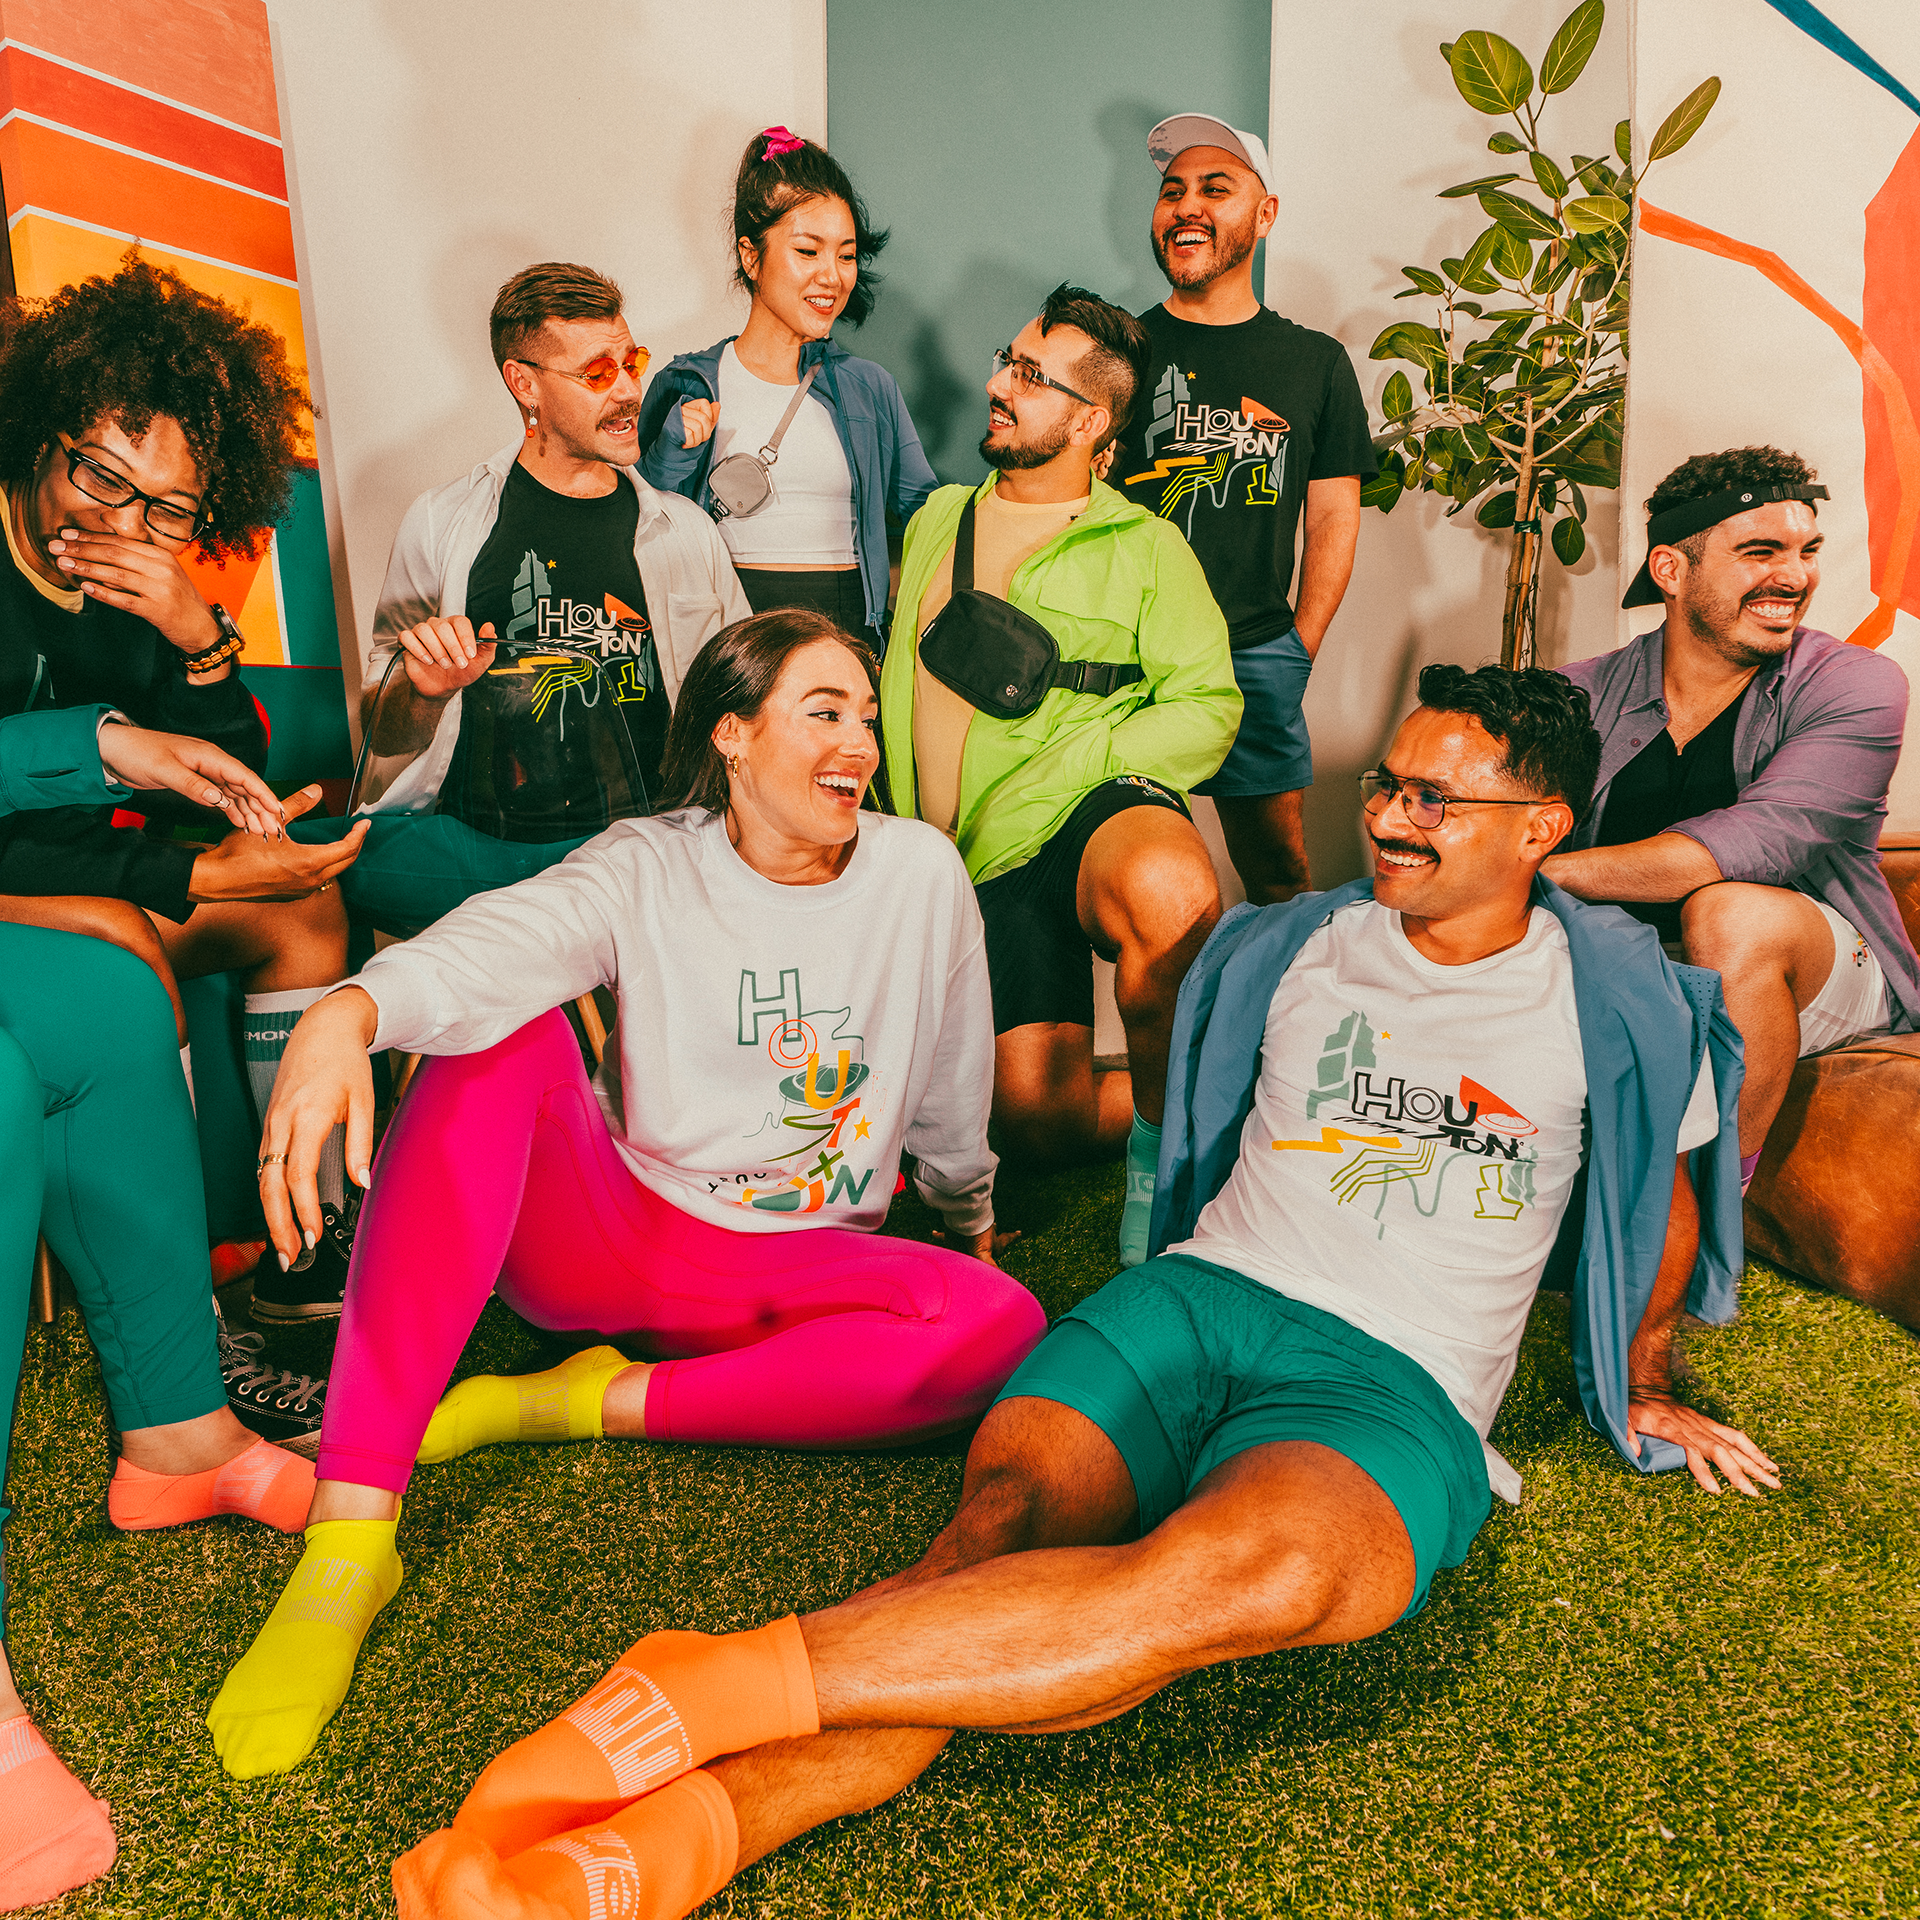 Eight people sit haphazardly on floors and couches smiling and having fun. They are all wearing shirts or shorts with the Houston design on them, and the colors are vibrant.